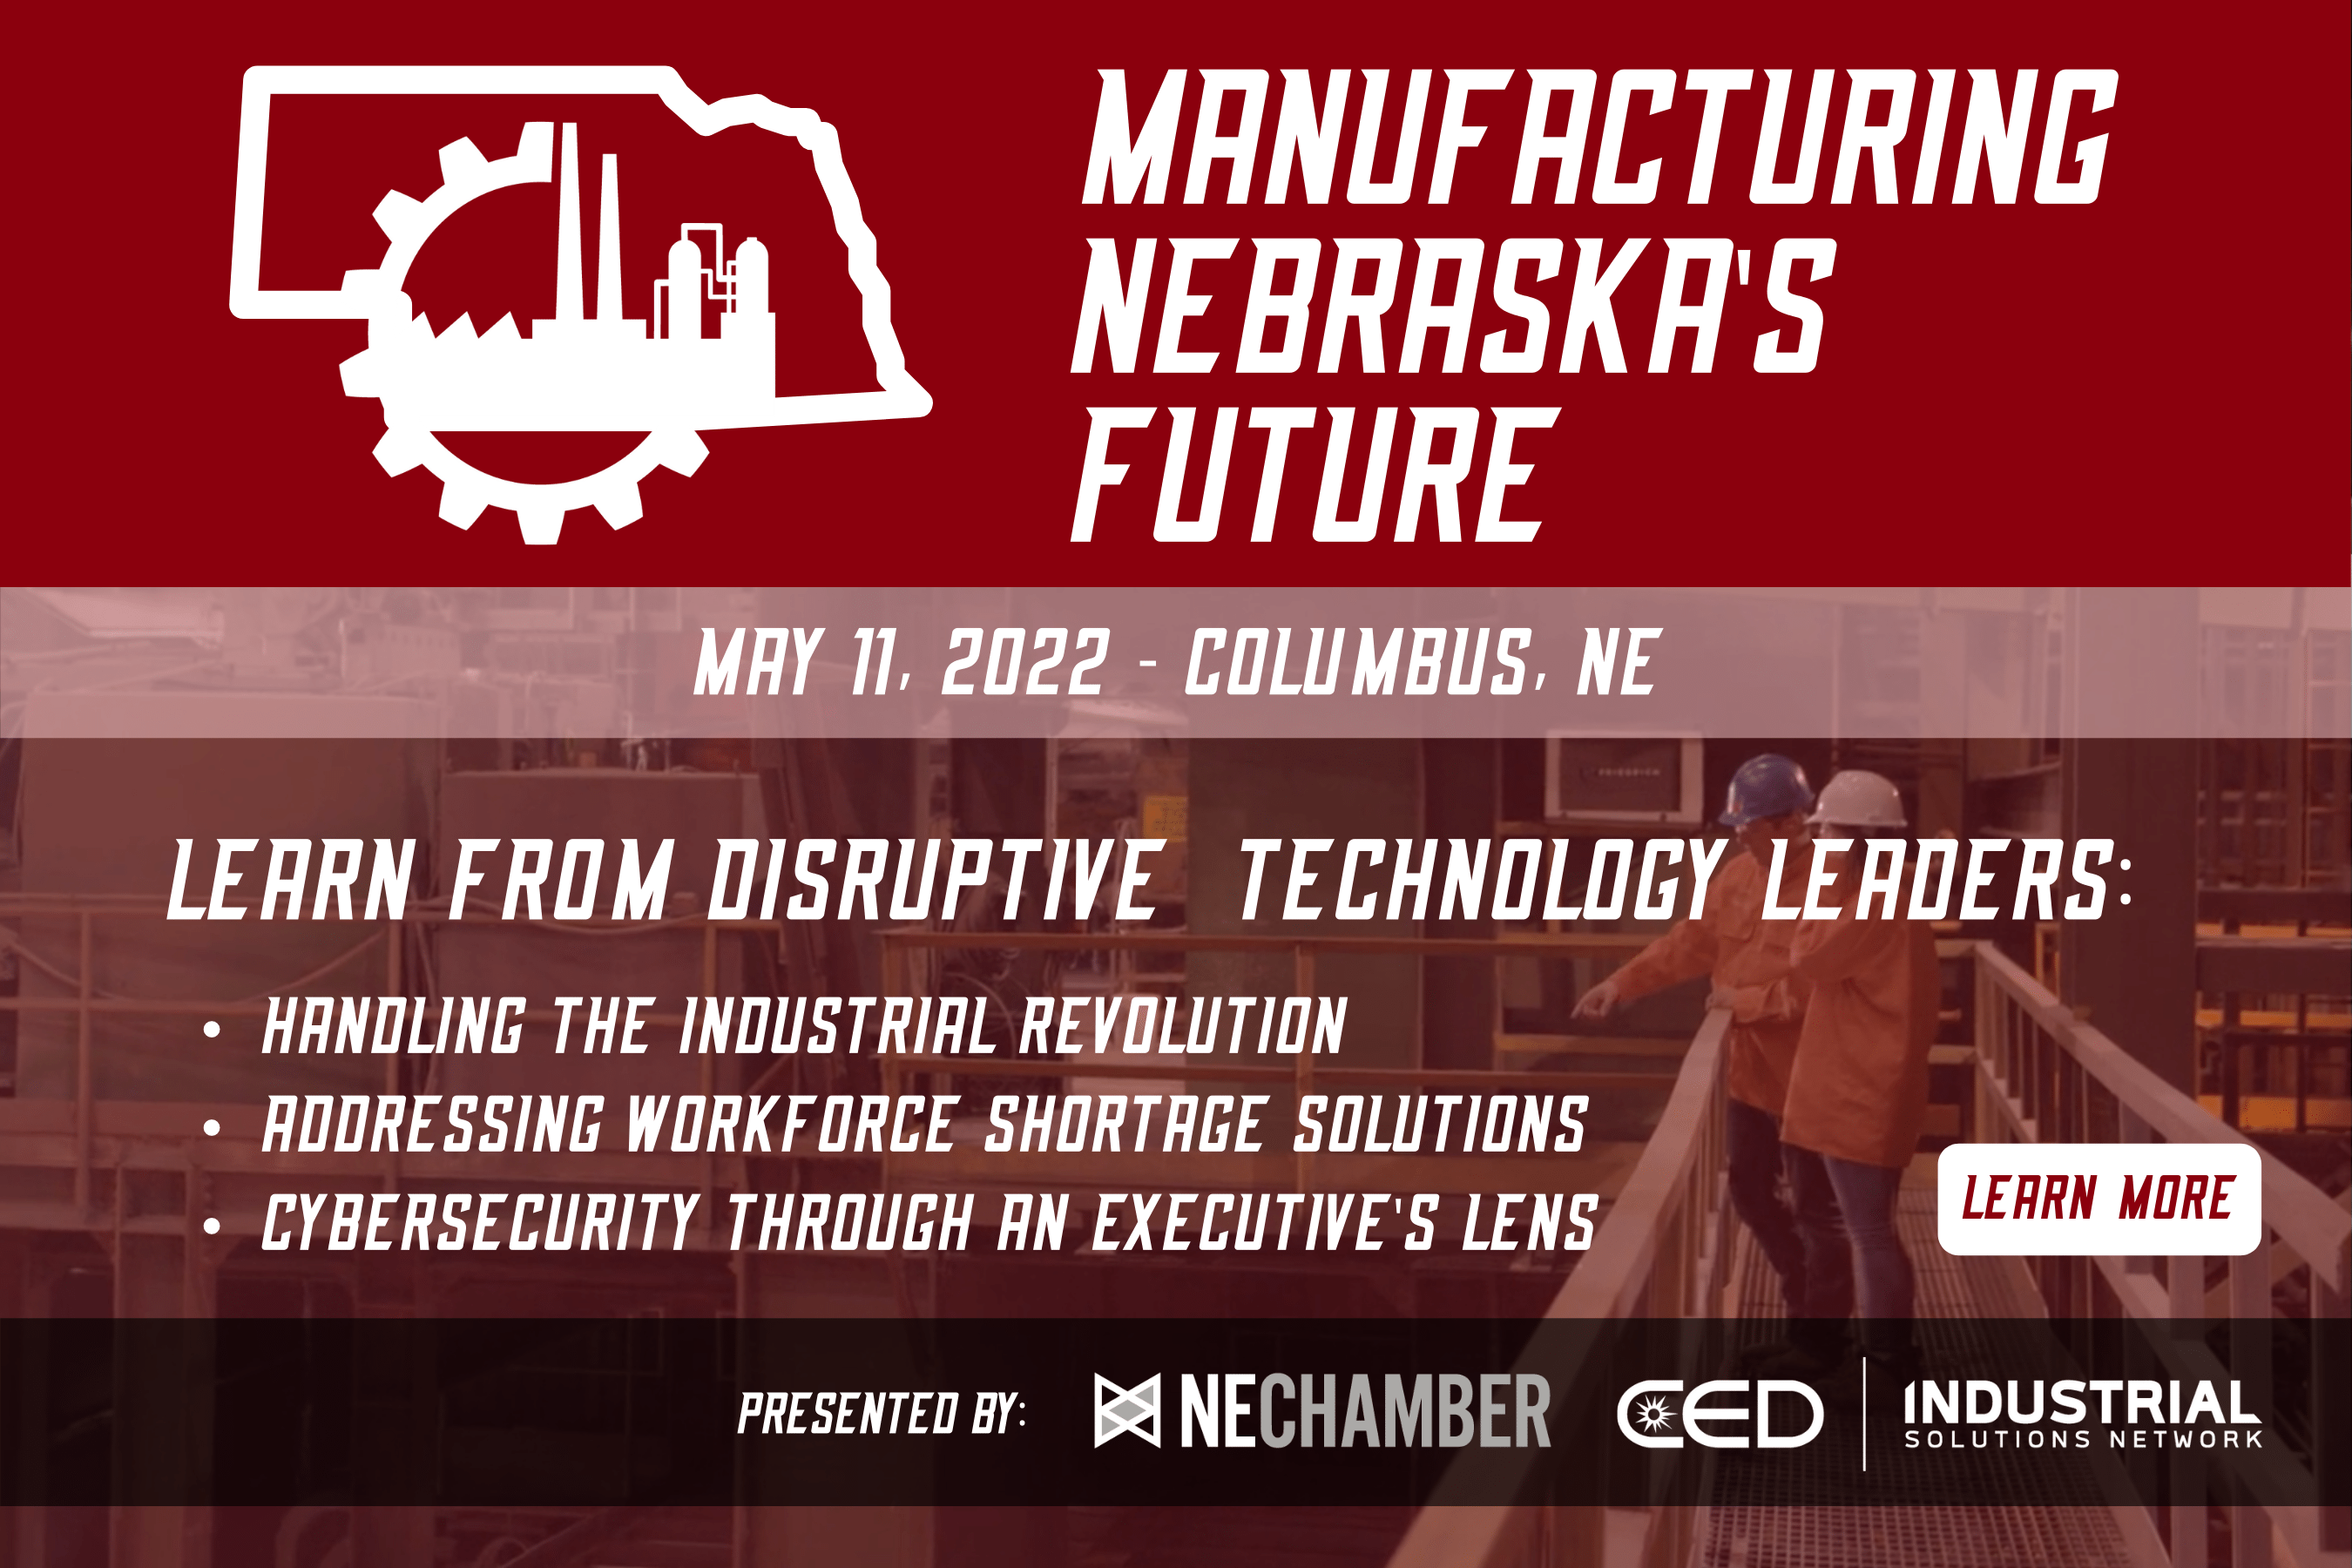 Manufacturing Nebraskas Future DIscussion Sponsored by CED and NE Chamber 